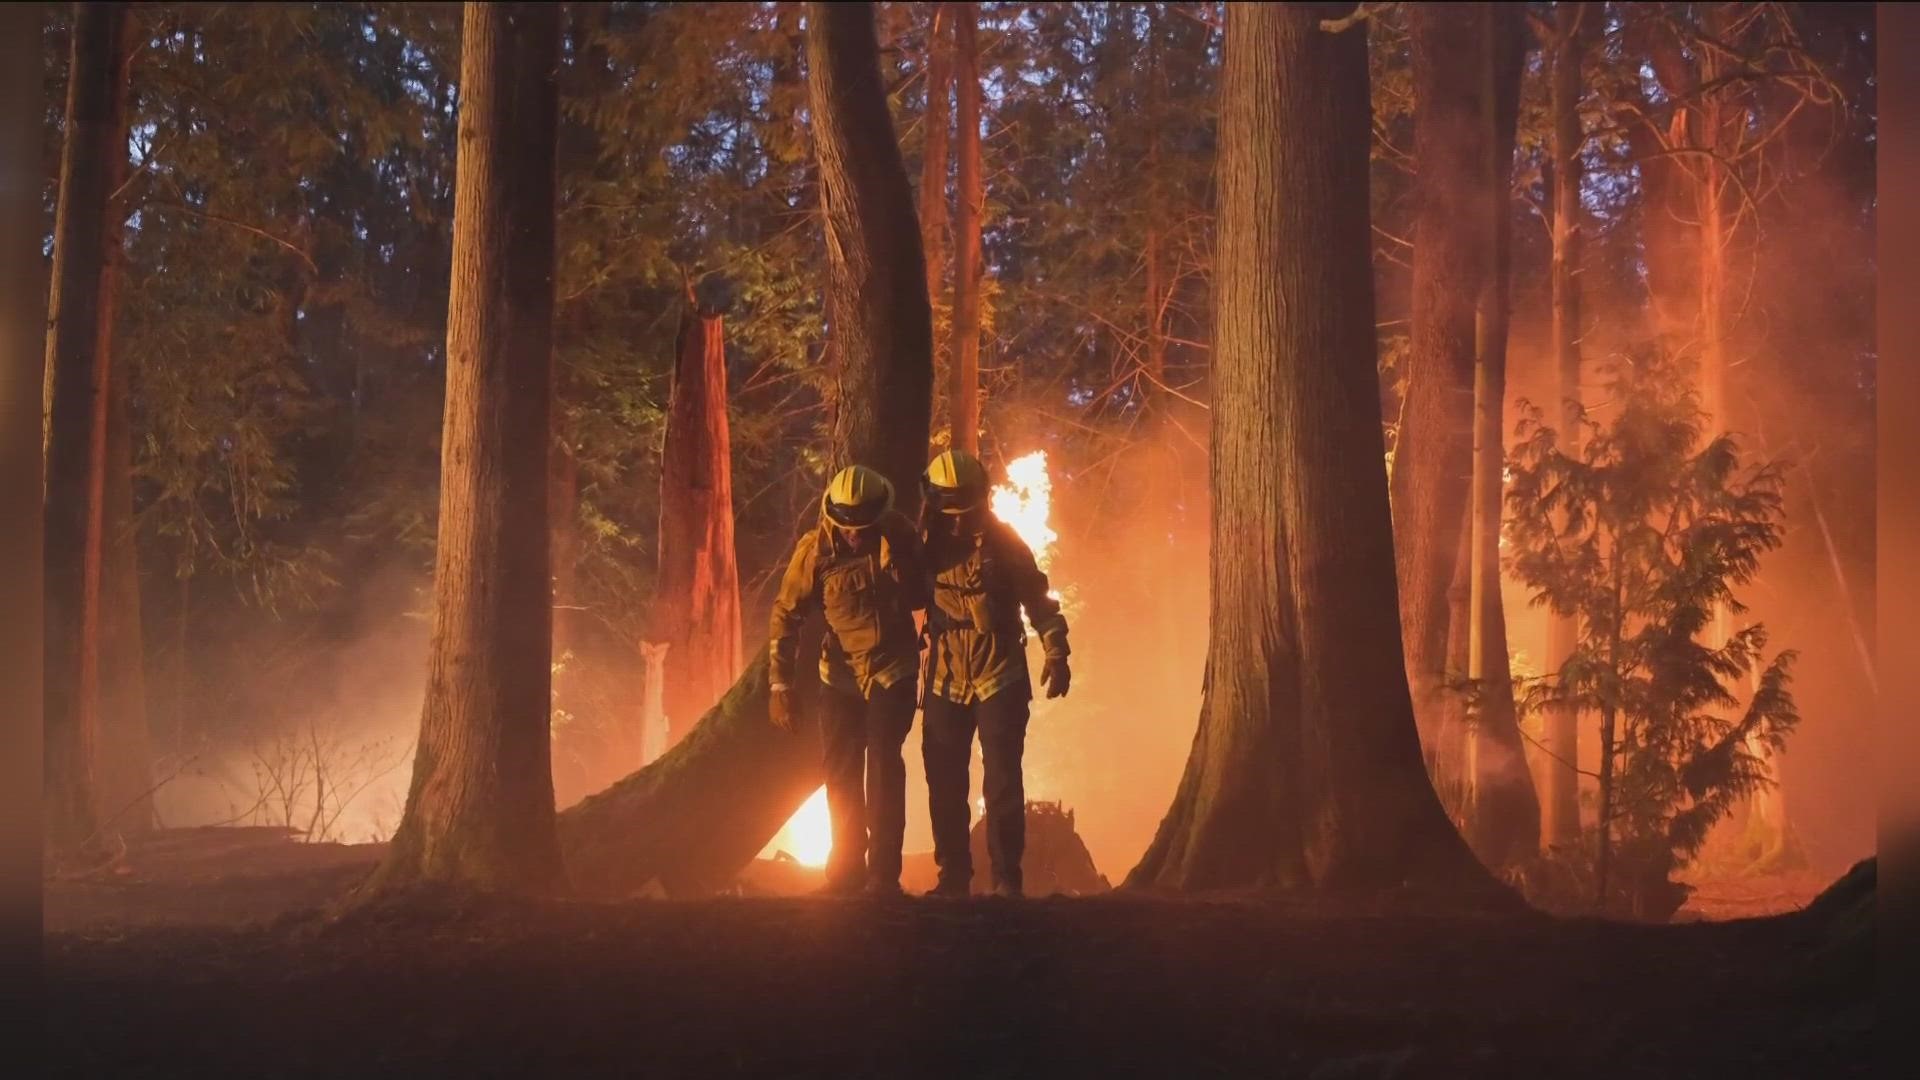 A tease of what to expect on the new hit show 'Fire Country' airing on CBS 8.